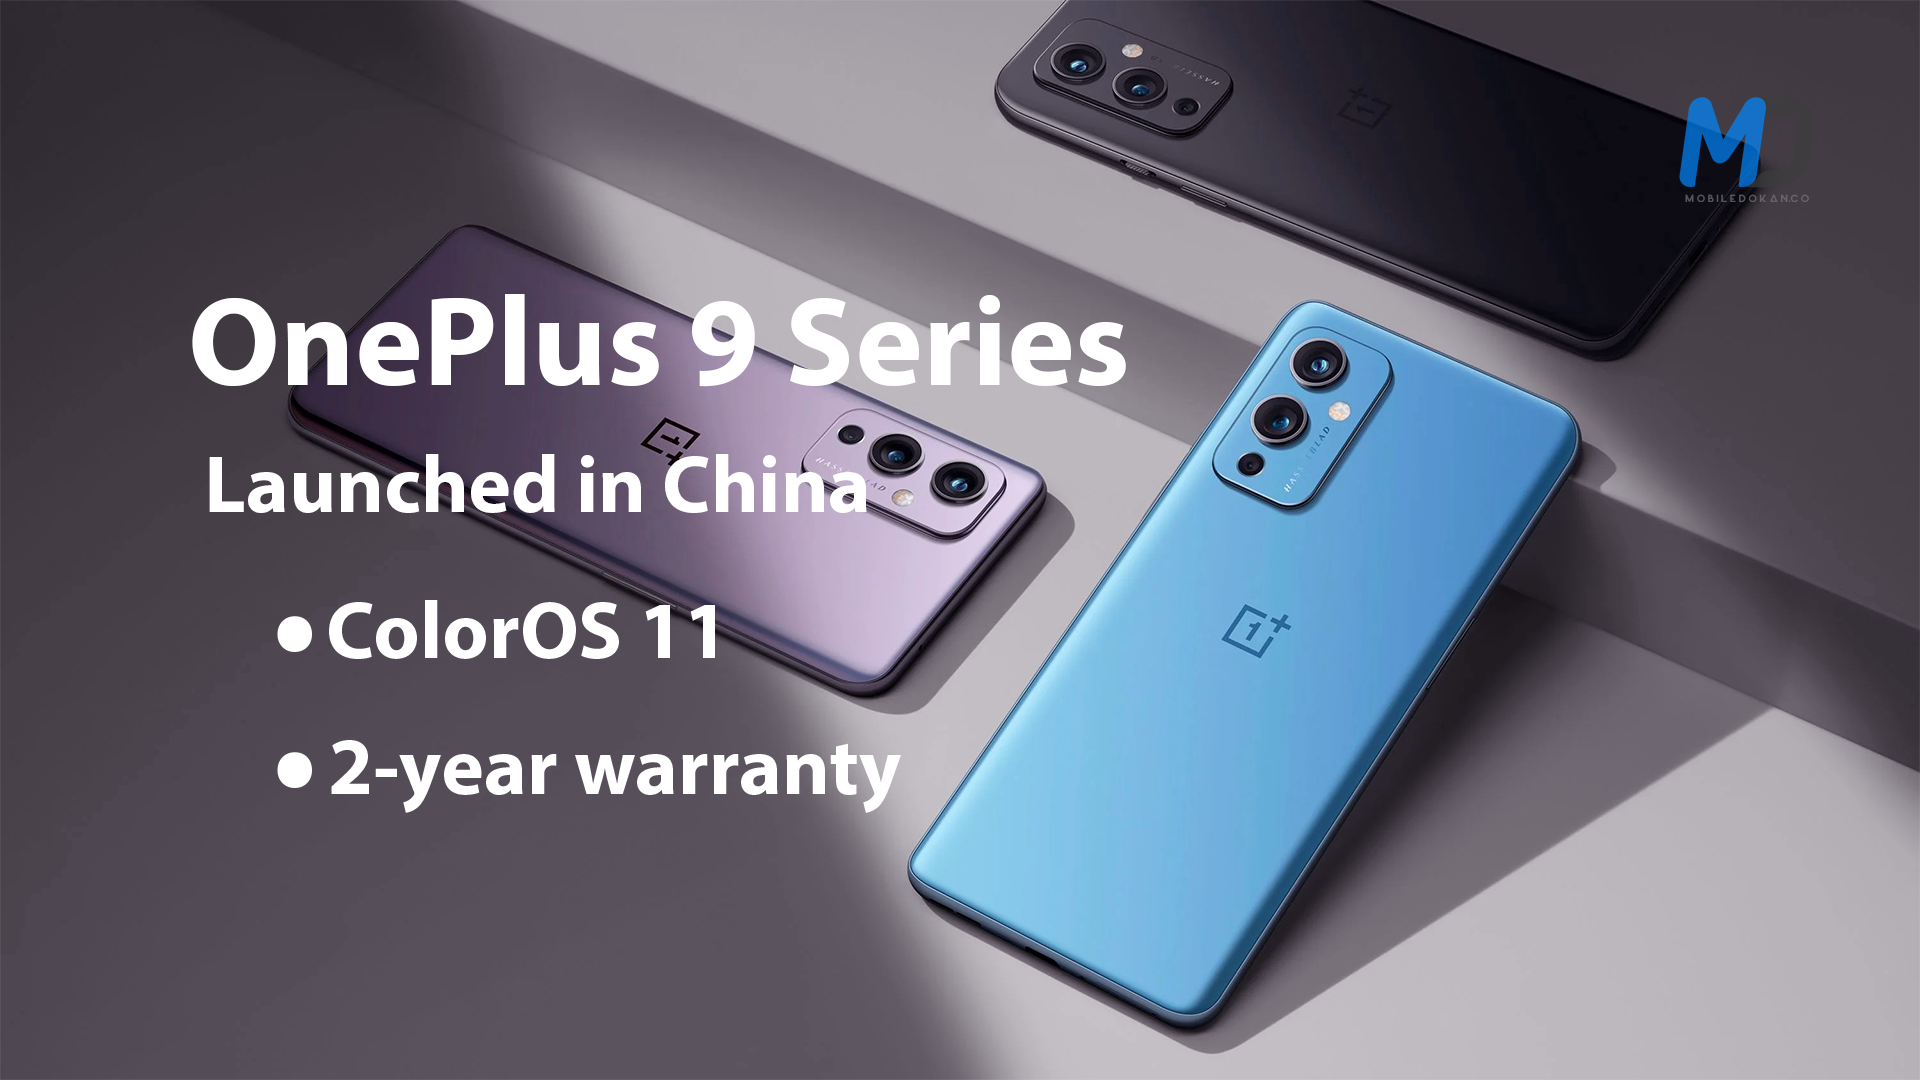 OnePlus 9 series launched with ColorOS 11, 2-year warranty in China